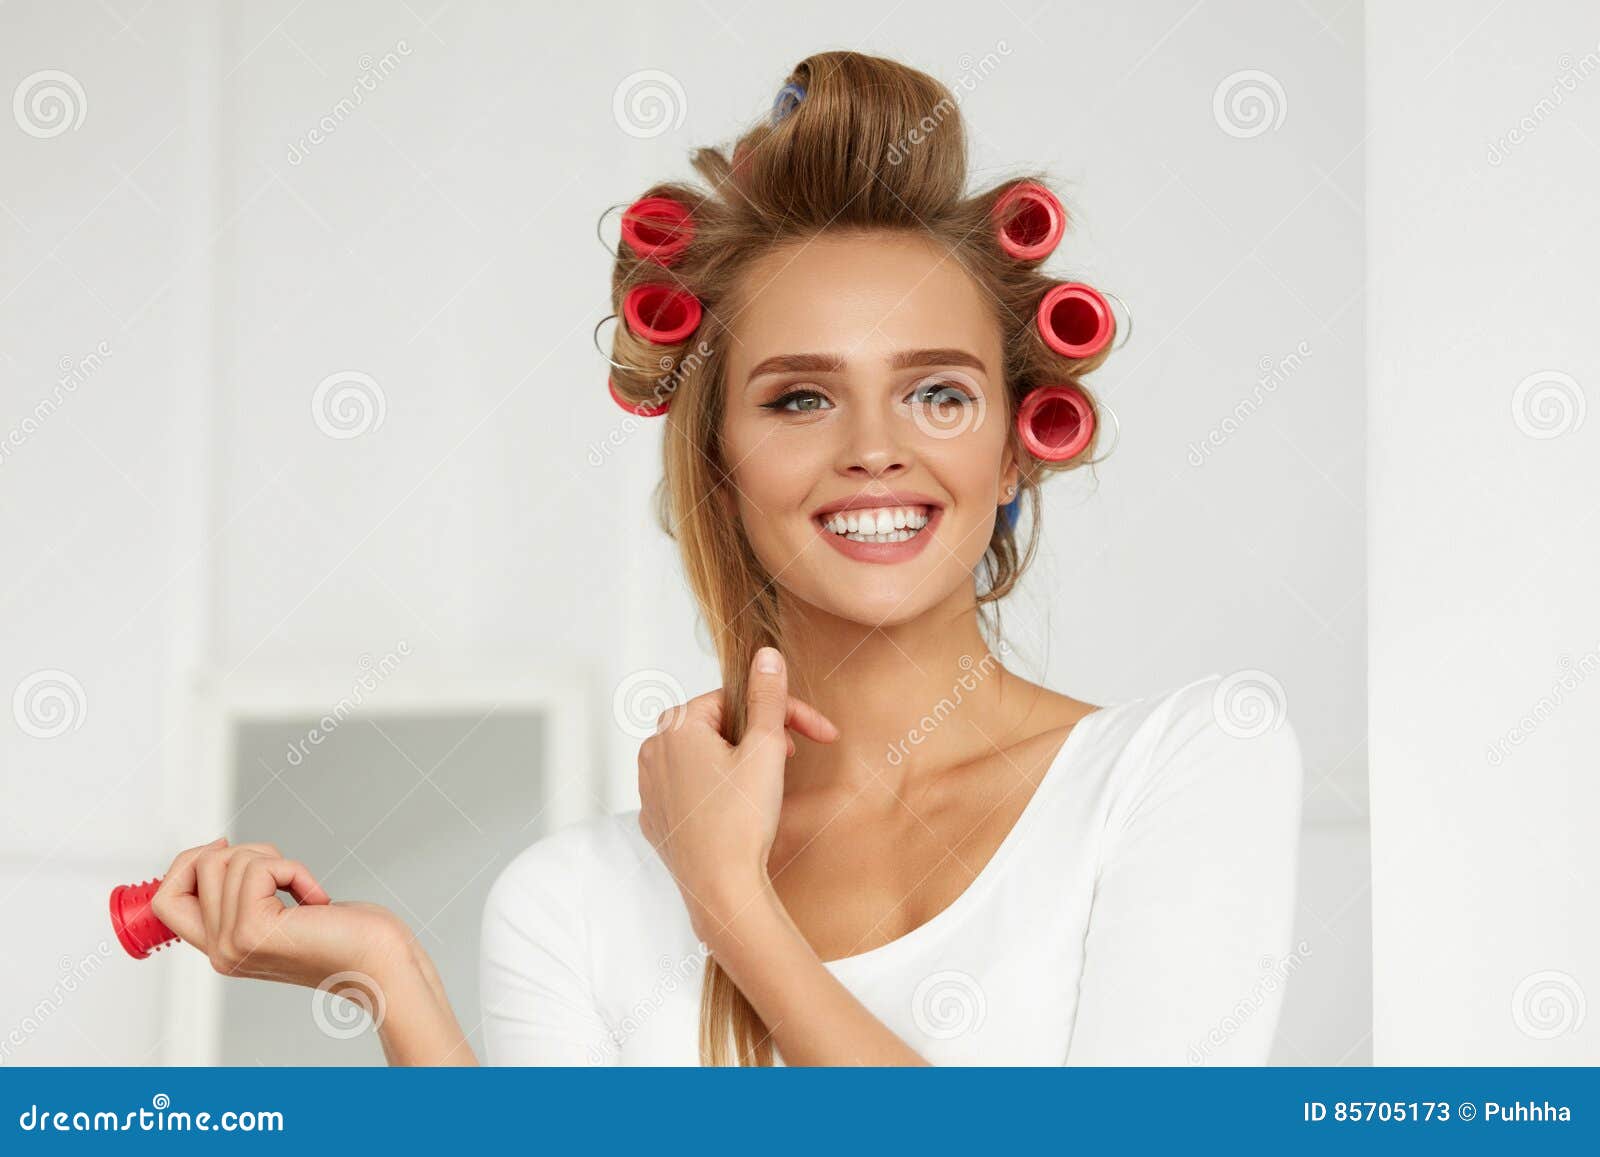 beautiful woman with hair curlers, hair rollers on healthy curly